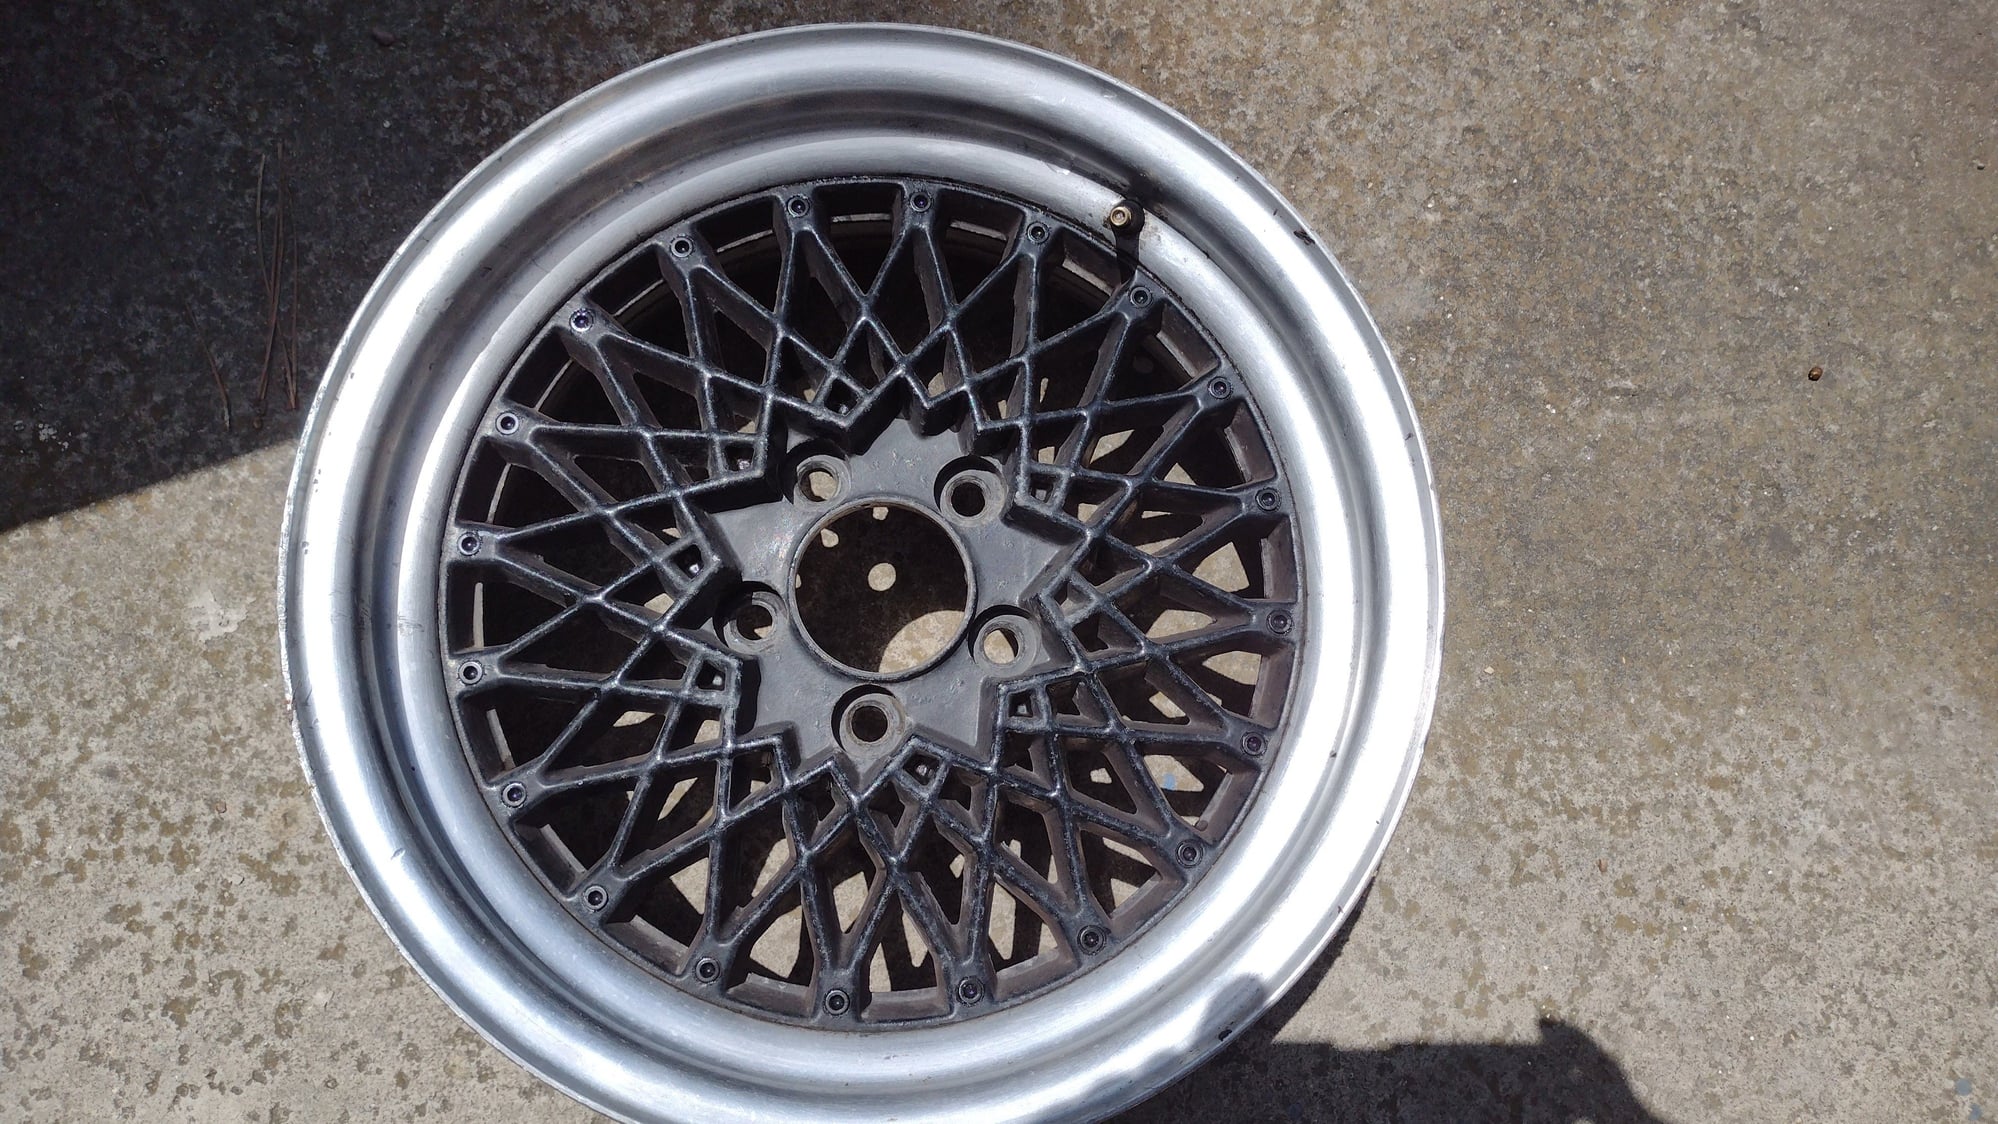 Wheels and Tires/Axles - OLD SCHOOL MESH 16x7 5x114.3 ALUMINUM WHEELS (SET OF 5) - Used - 1986 to 1992 Mazda RX-7 - Del Mar, CA 92014, United States